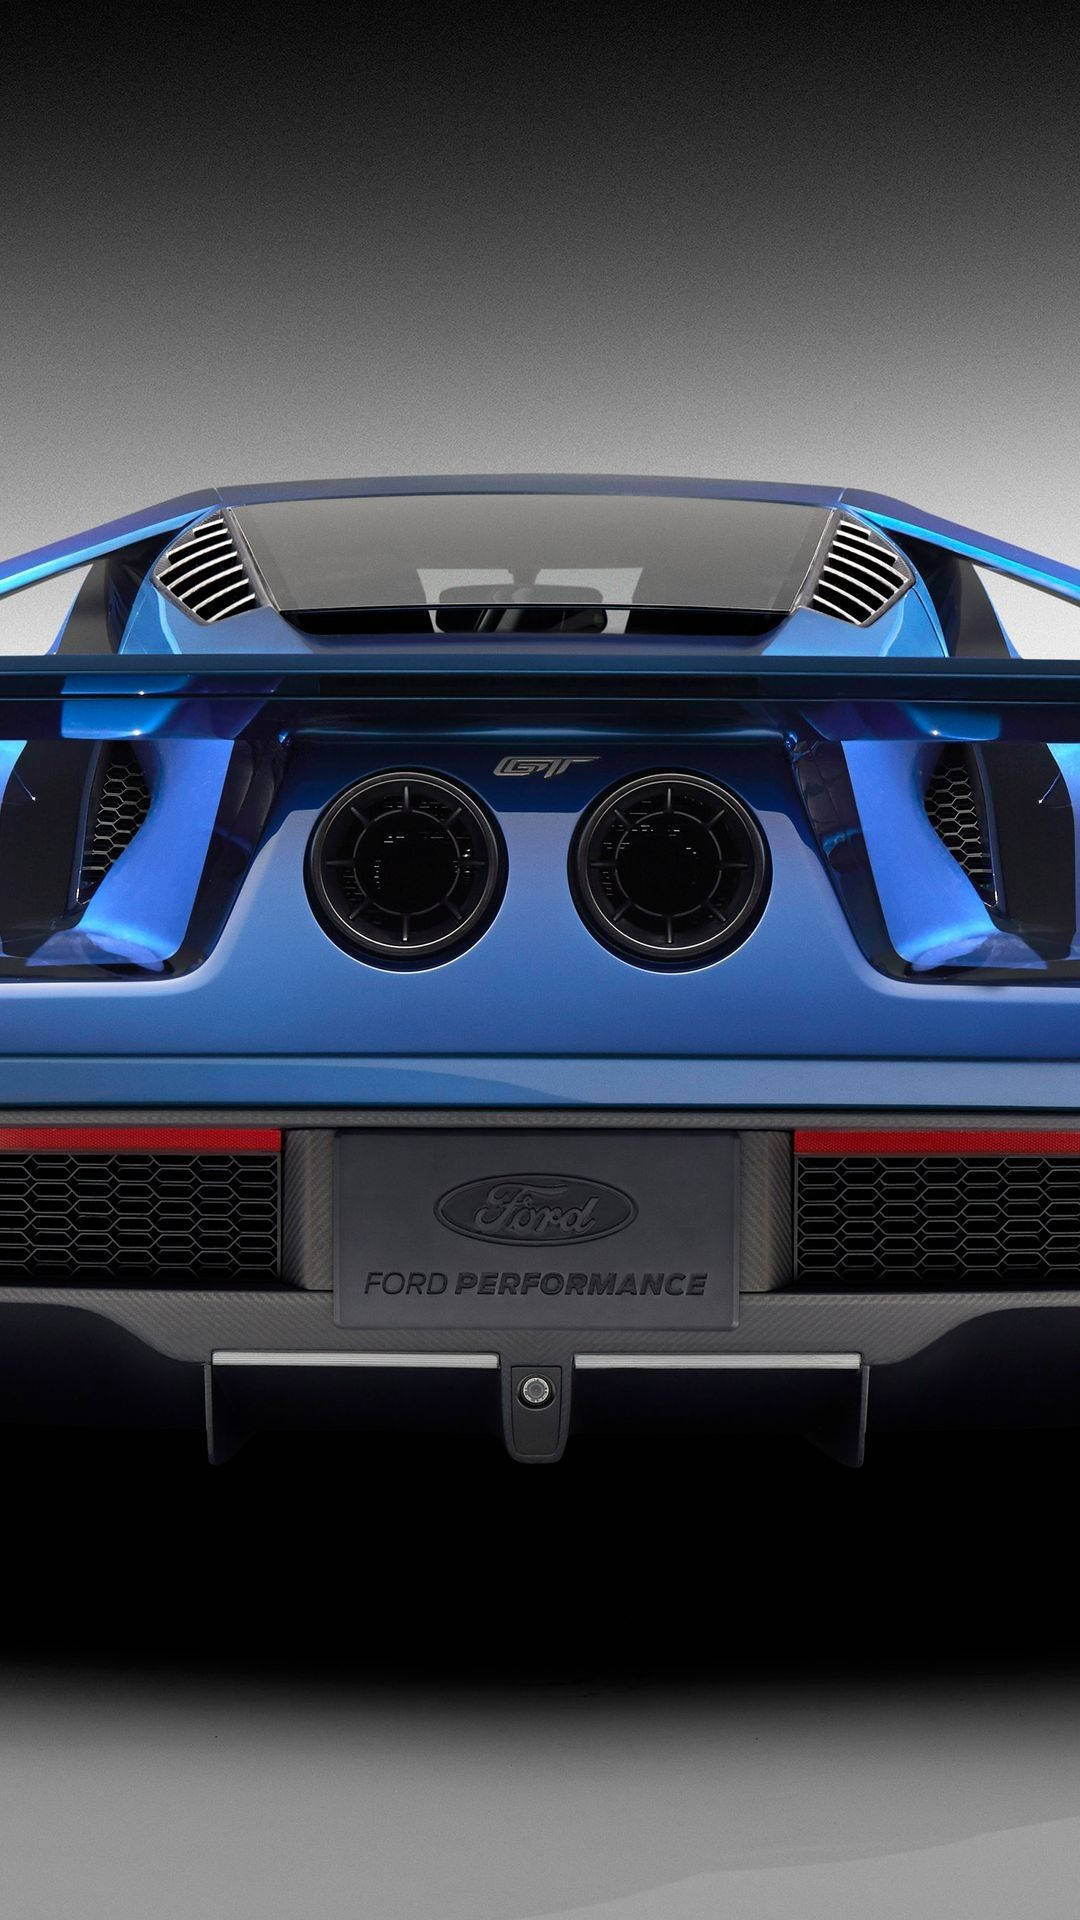 Ford Iphone Rear Bumper Background